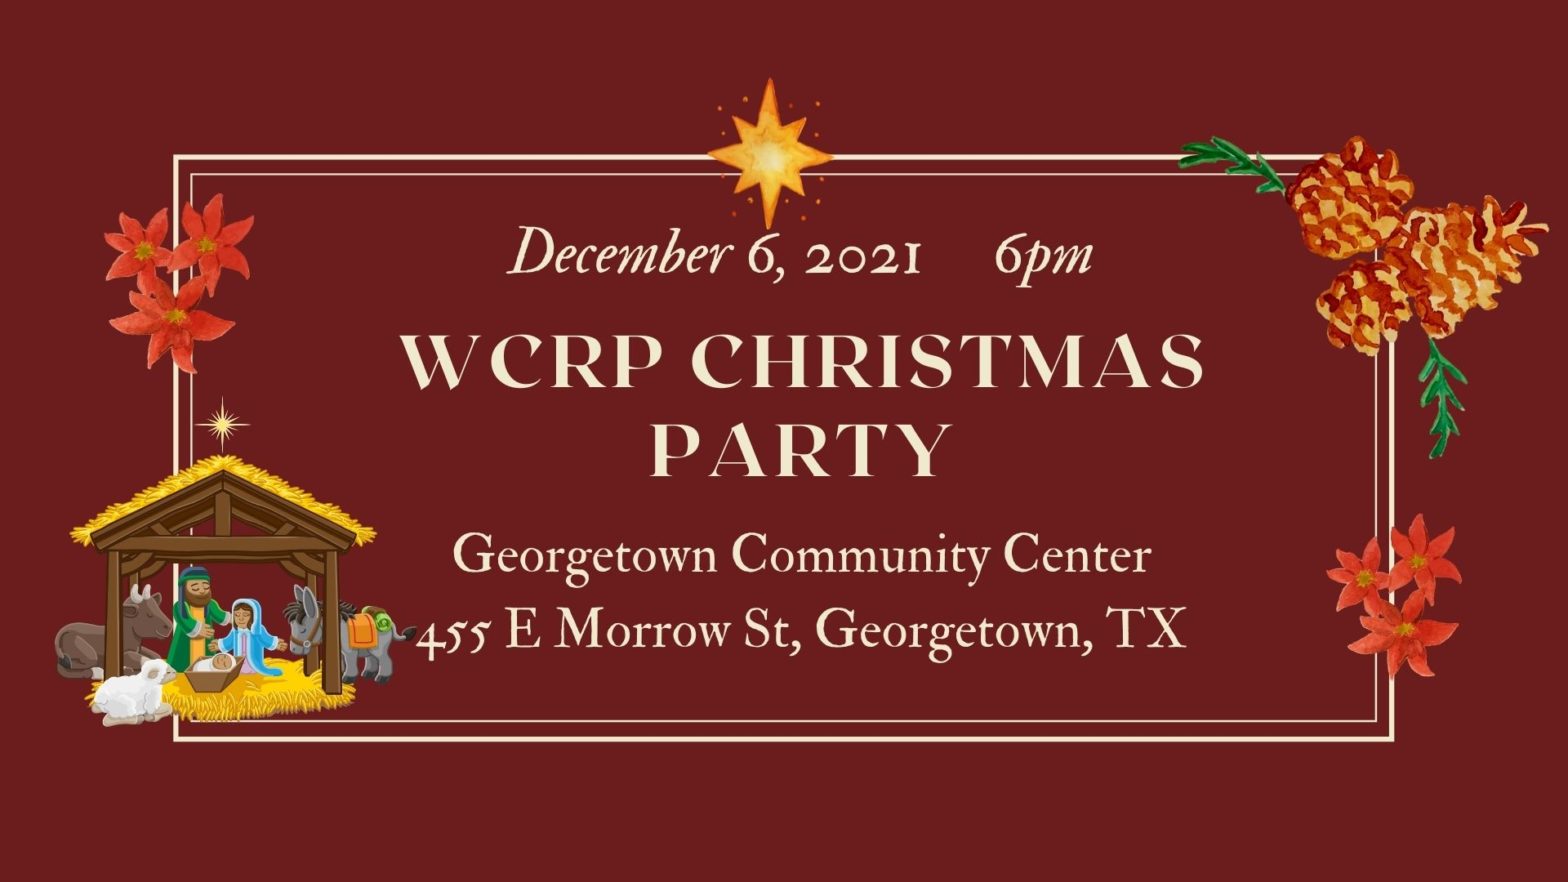 WCRP Christmas Party 2021 Williamson County GOP